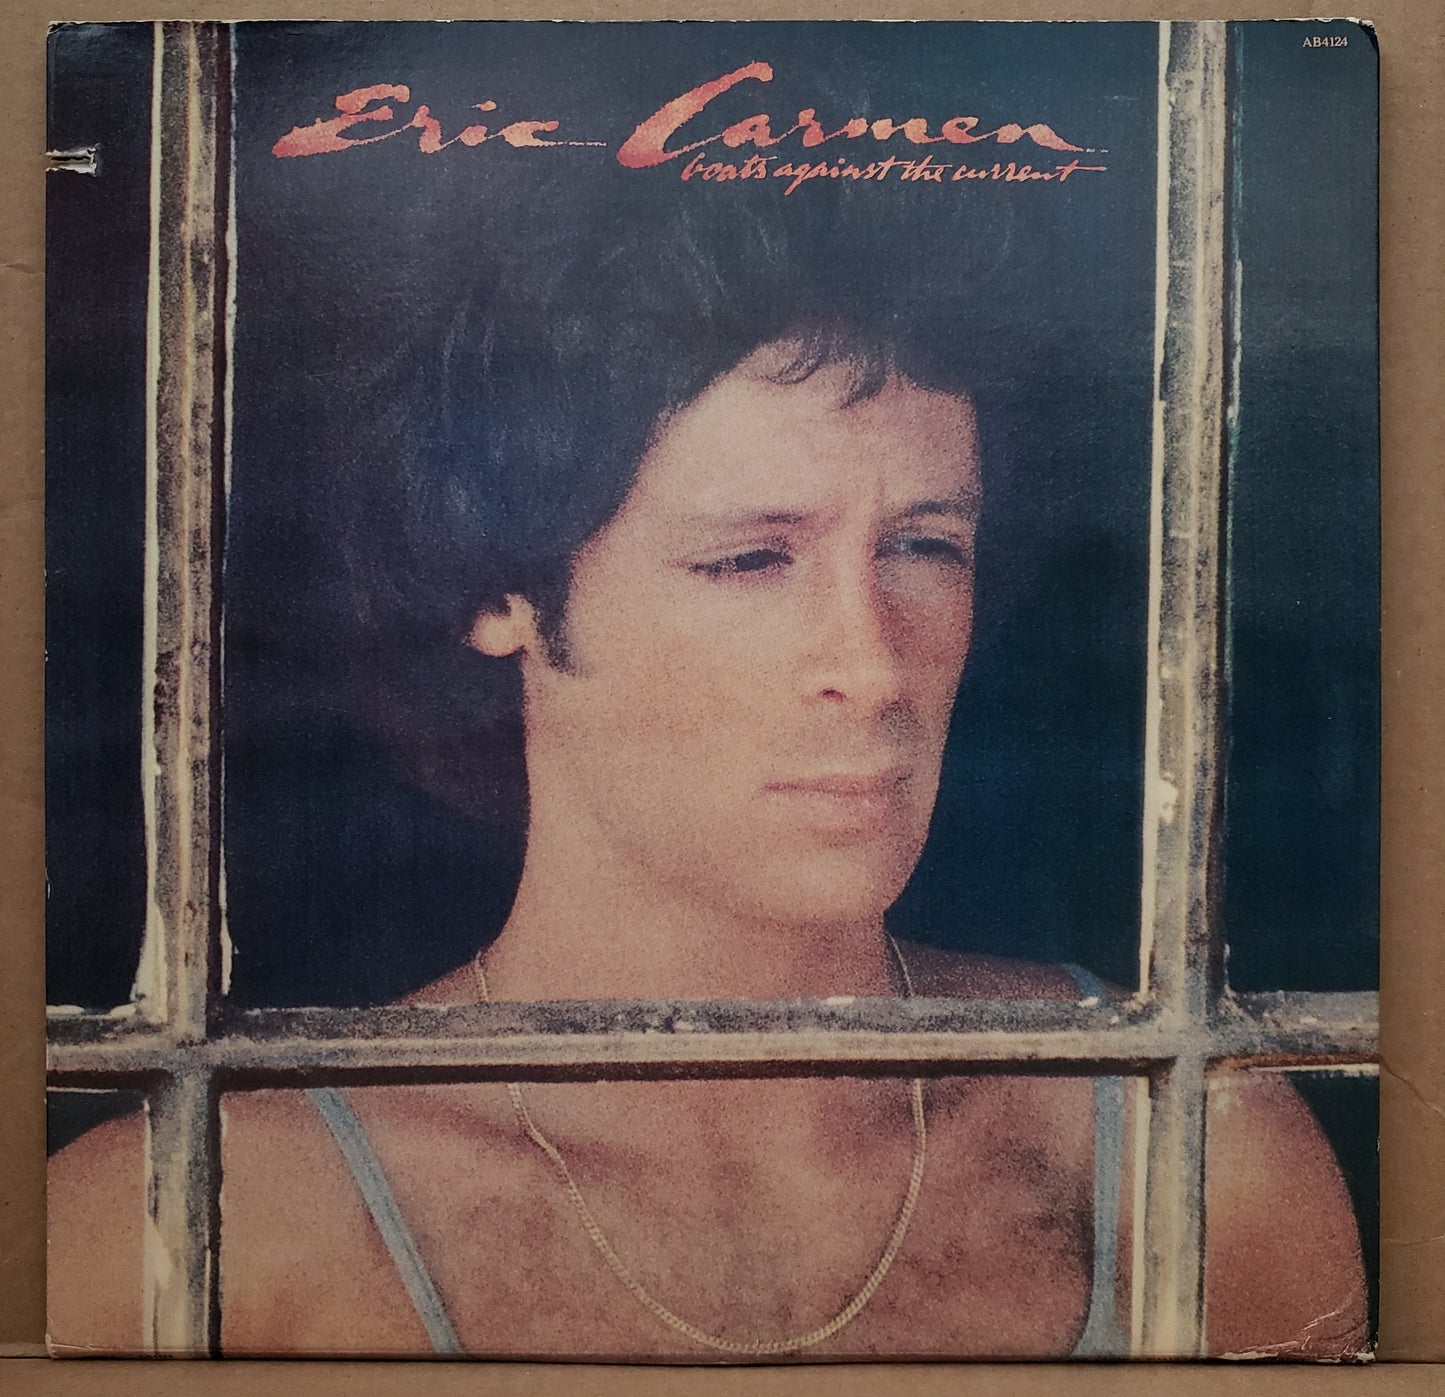 Eric Carmen - Boats Against the Current [1977 Used Vinyl Record LP]